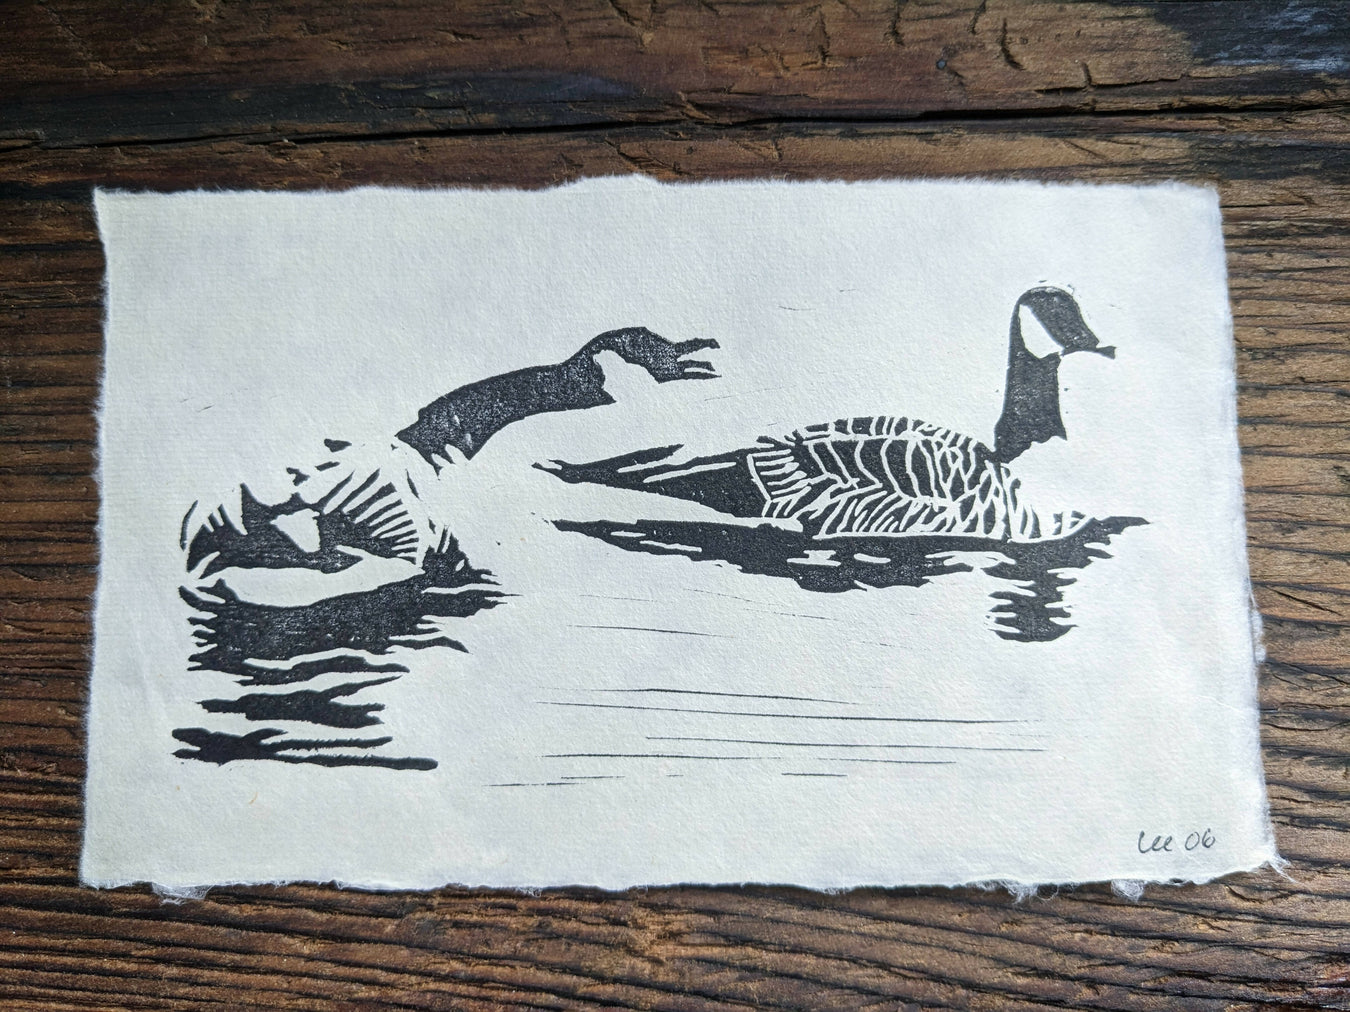 a print in black ink showing two geese, one honking at the other